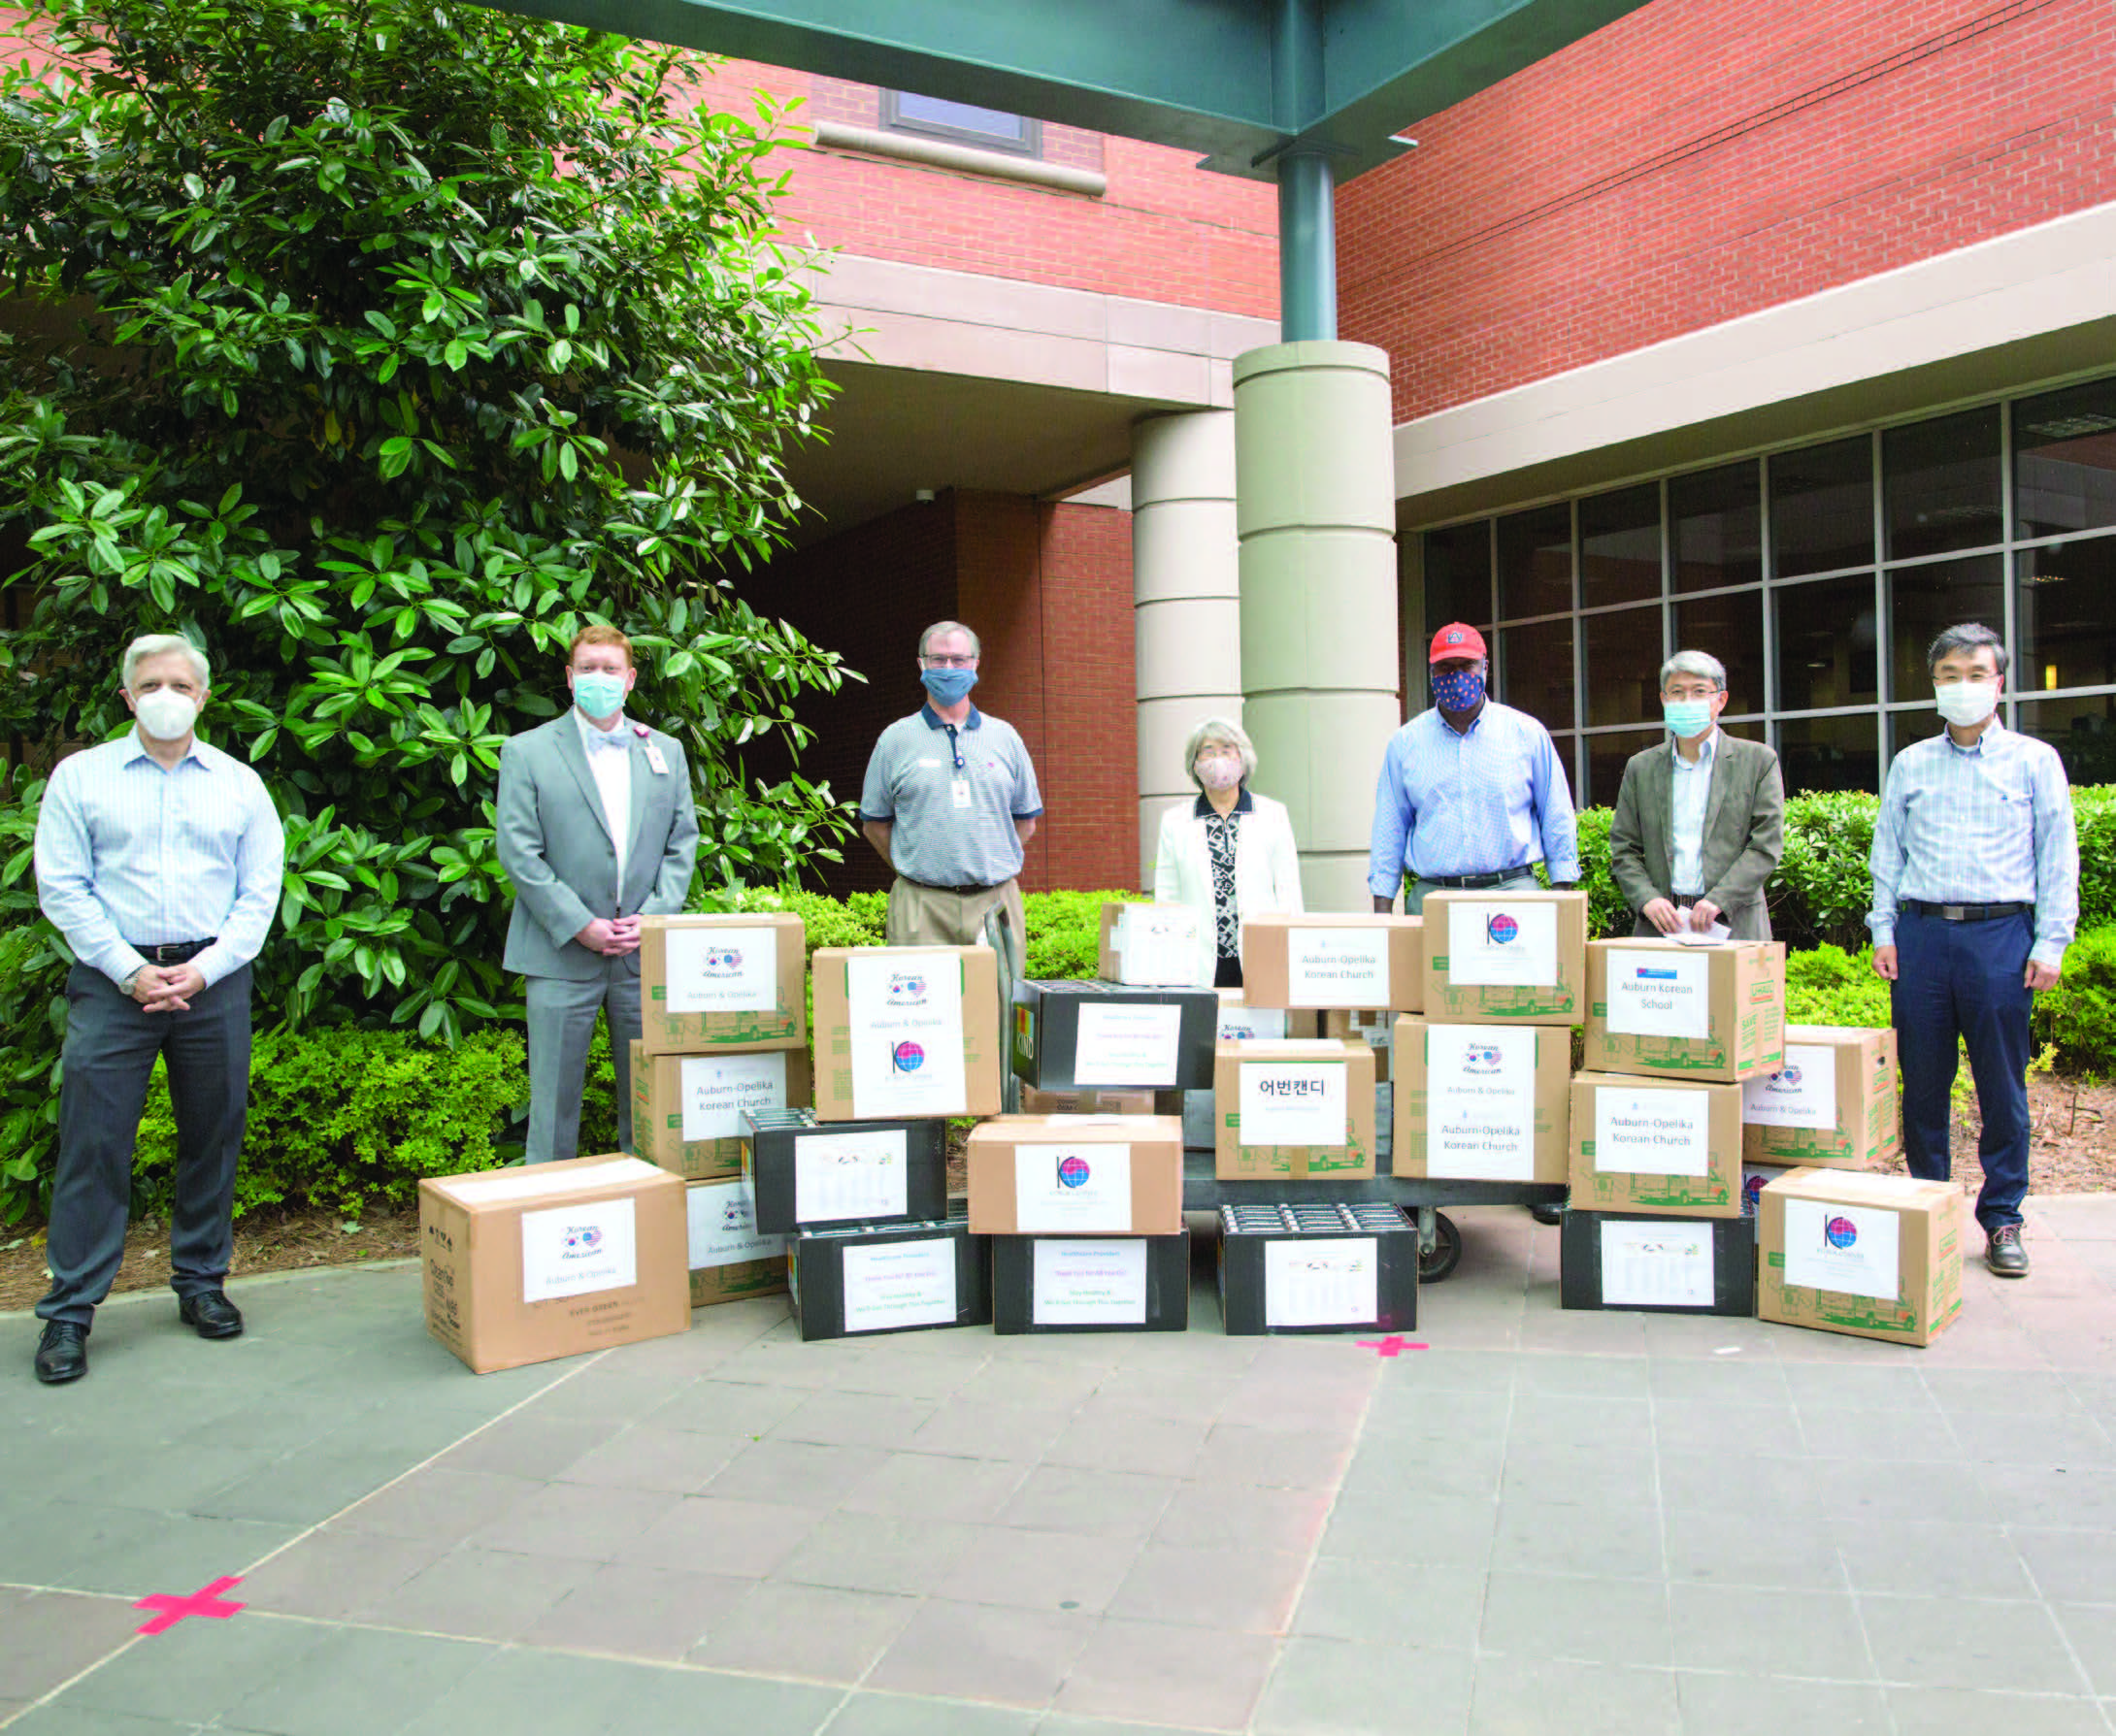 People wearing face masks pose behind boxes of donation materials in front of hospital